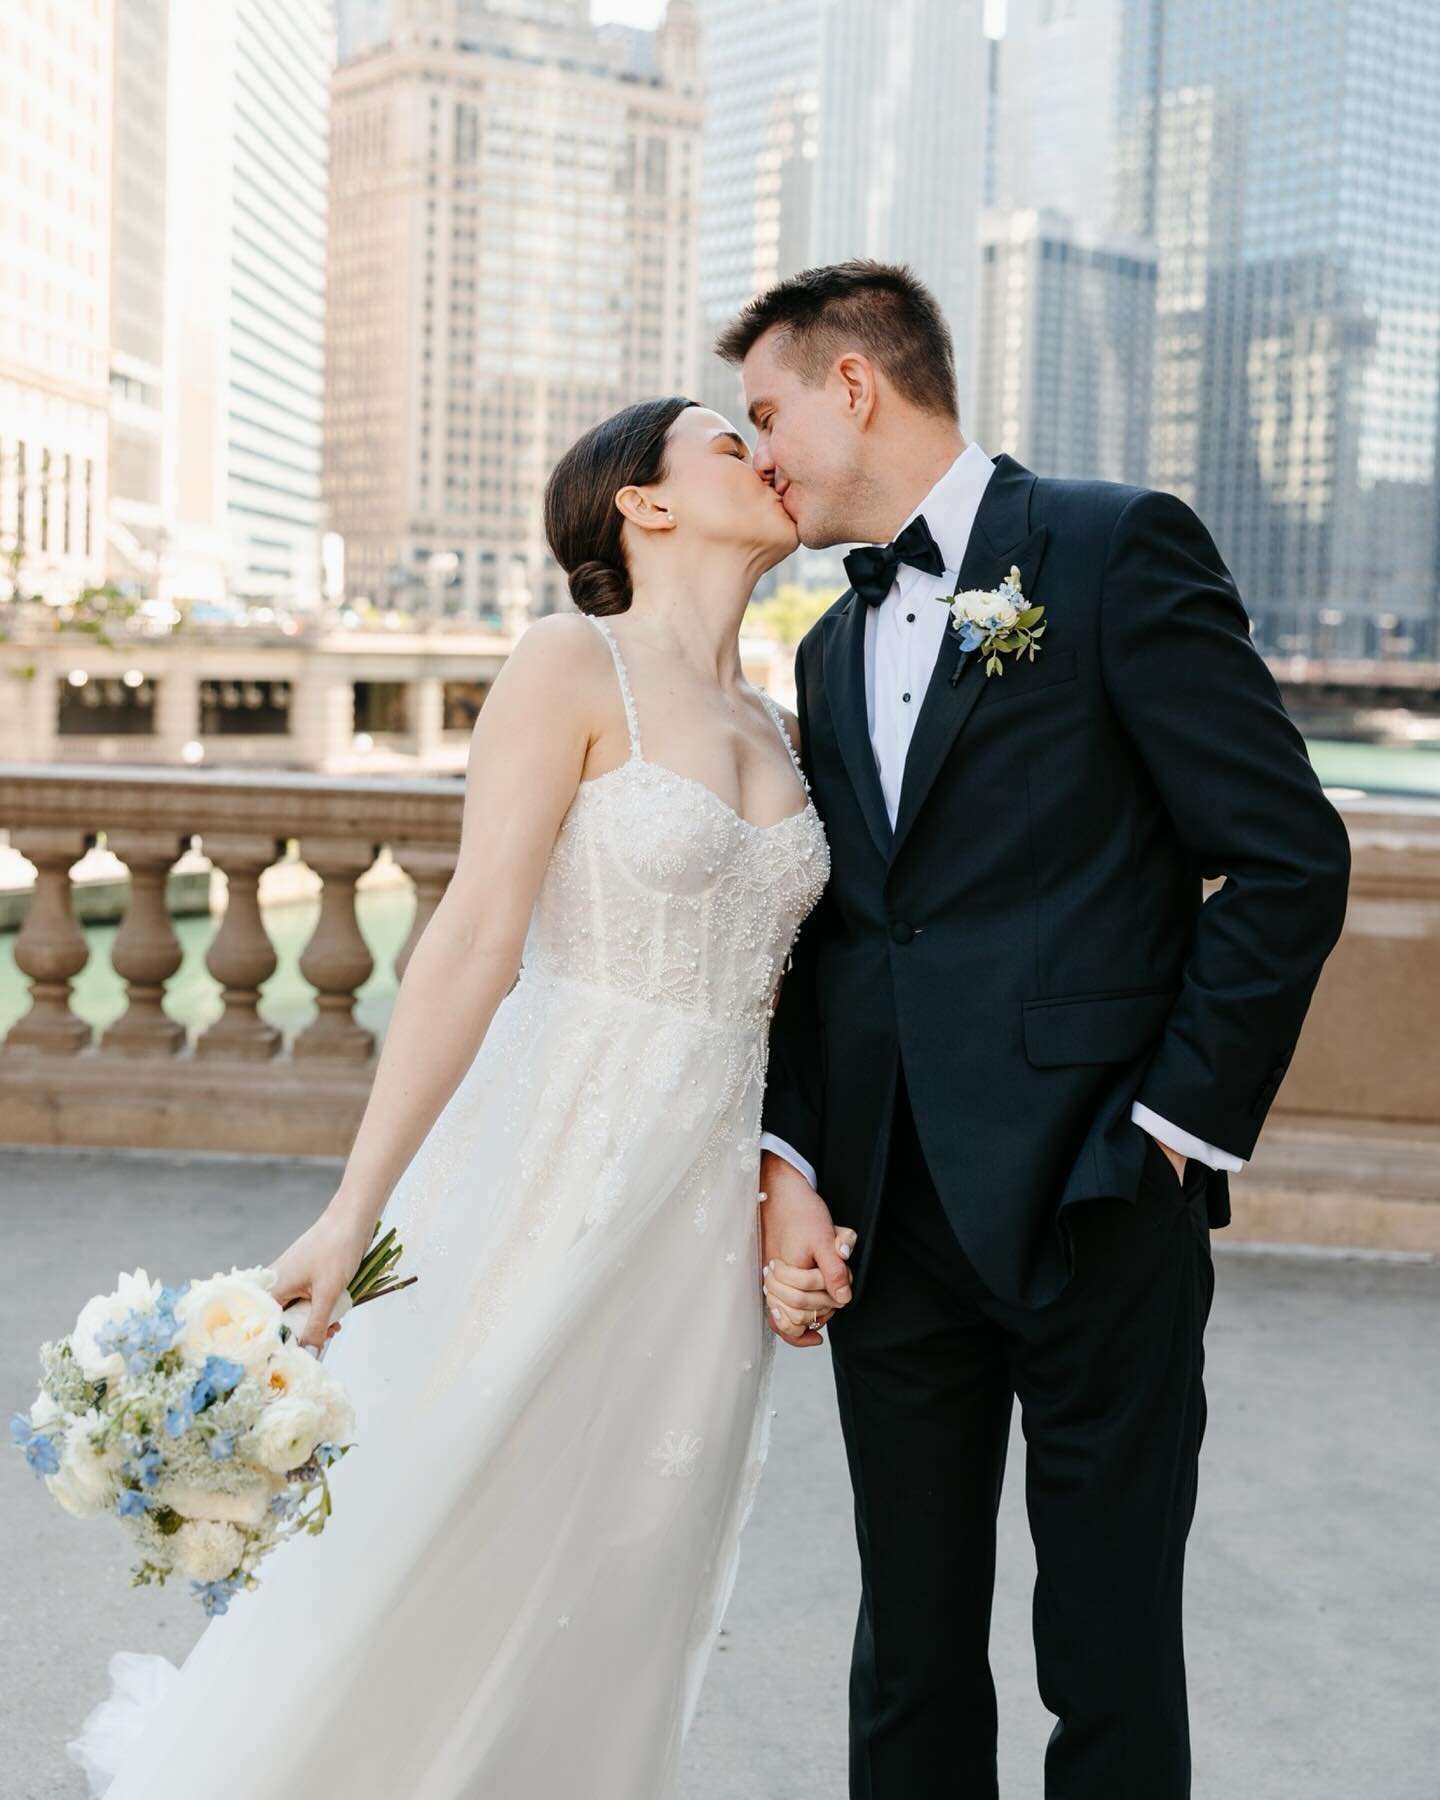 The PERFECT May Saturday with Julie and Taylor! They&rsquo;ve been looking forward to this day for so long and Chicago SHOWED UP with the most beautiful day! Walking through the city in the sunshine with J+T and their people before their ceremony at 